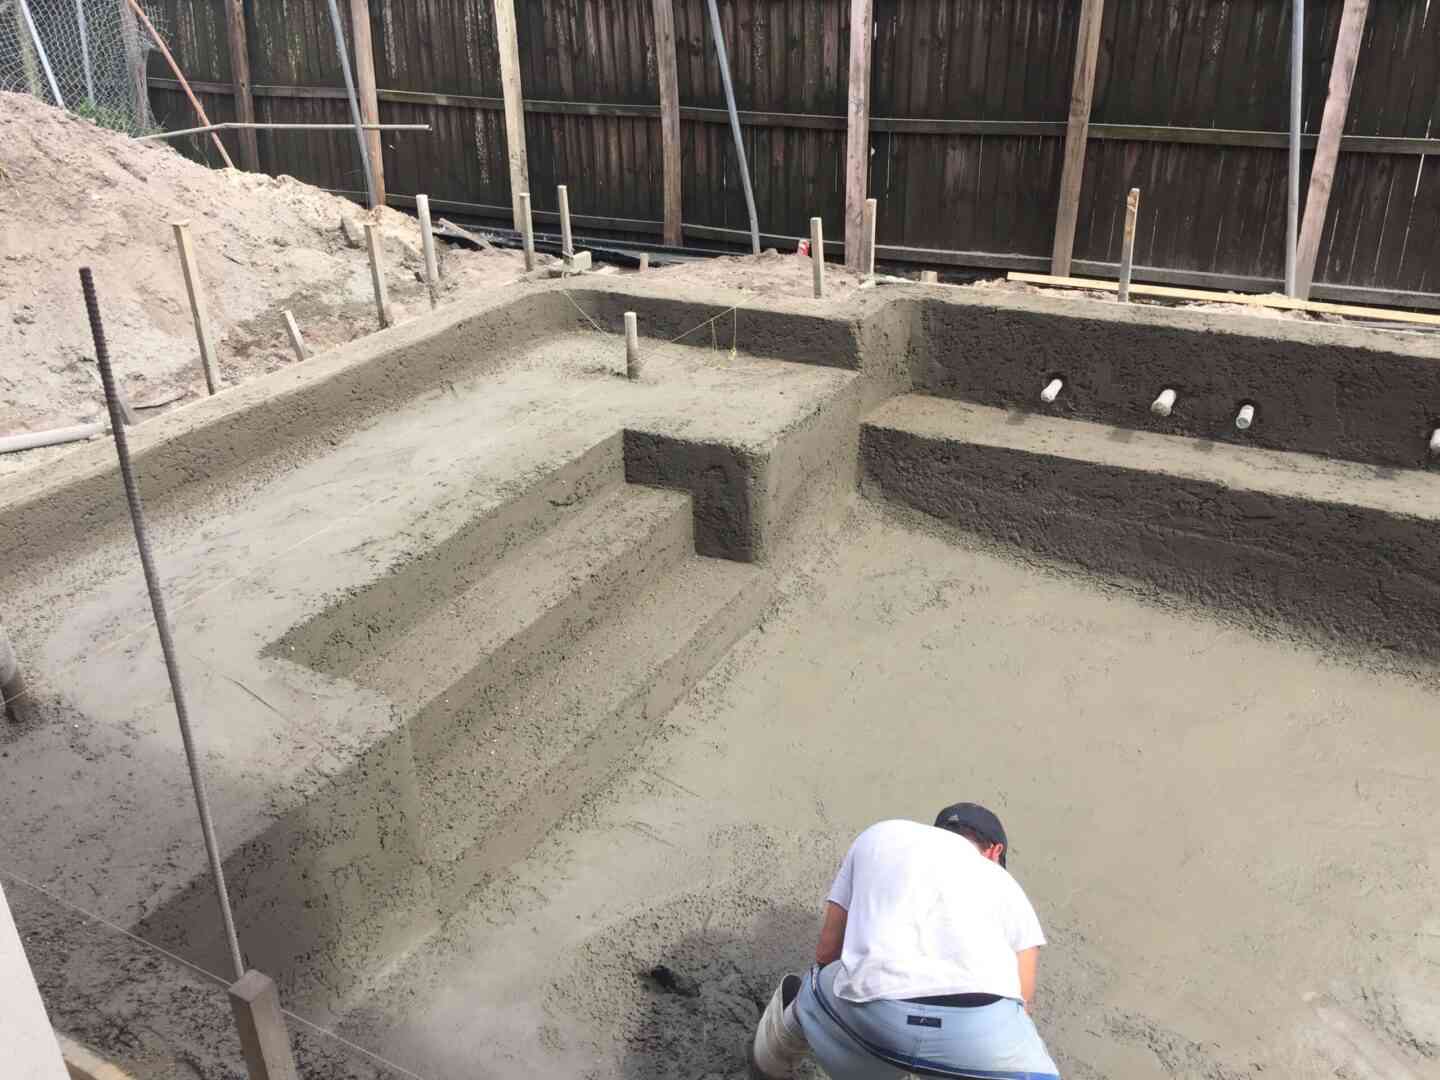 Pool structure being cemented